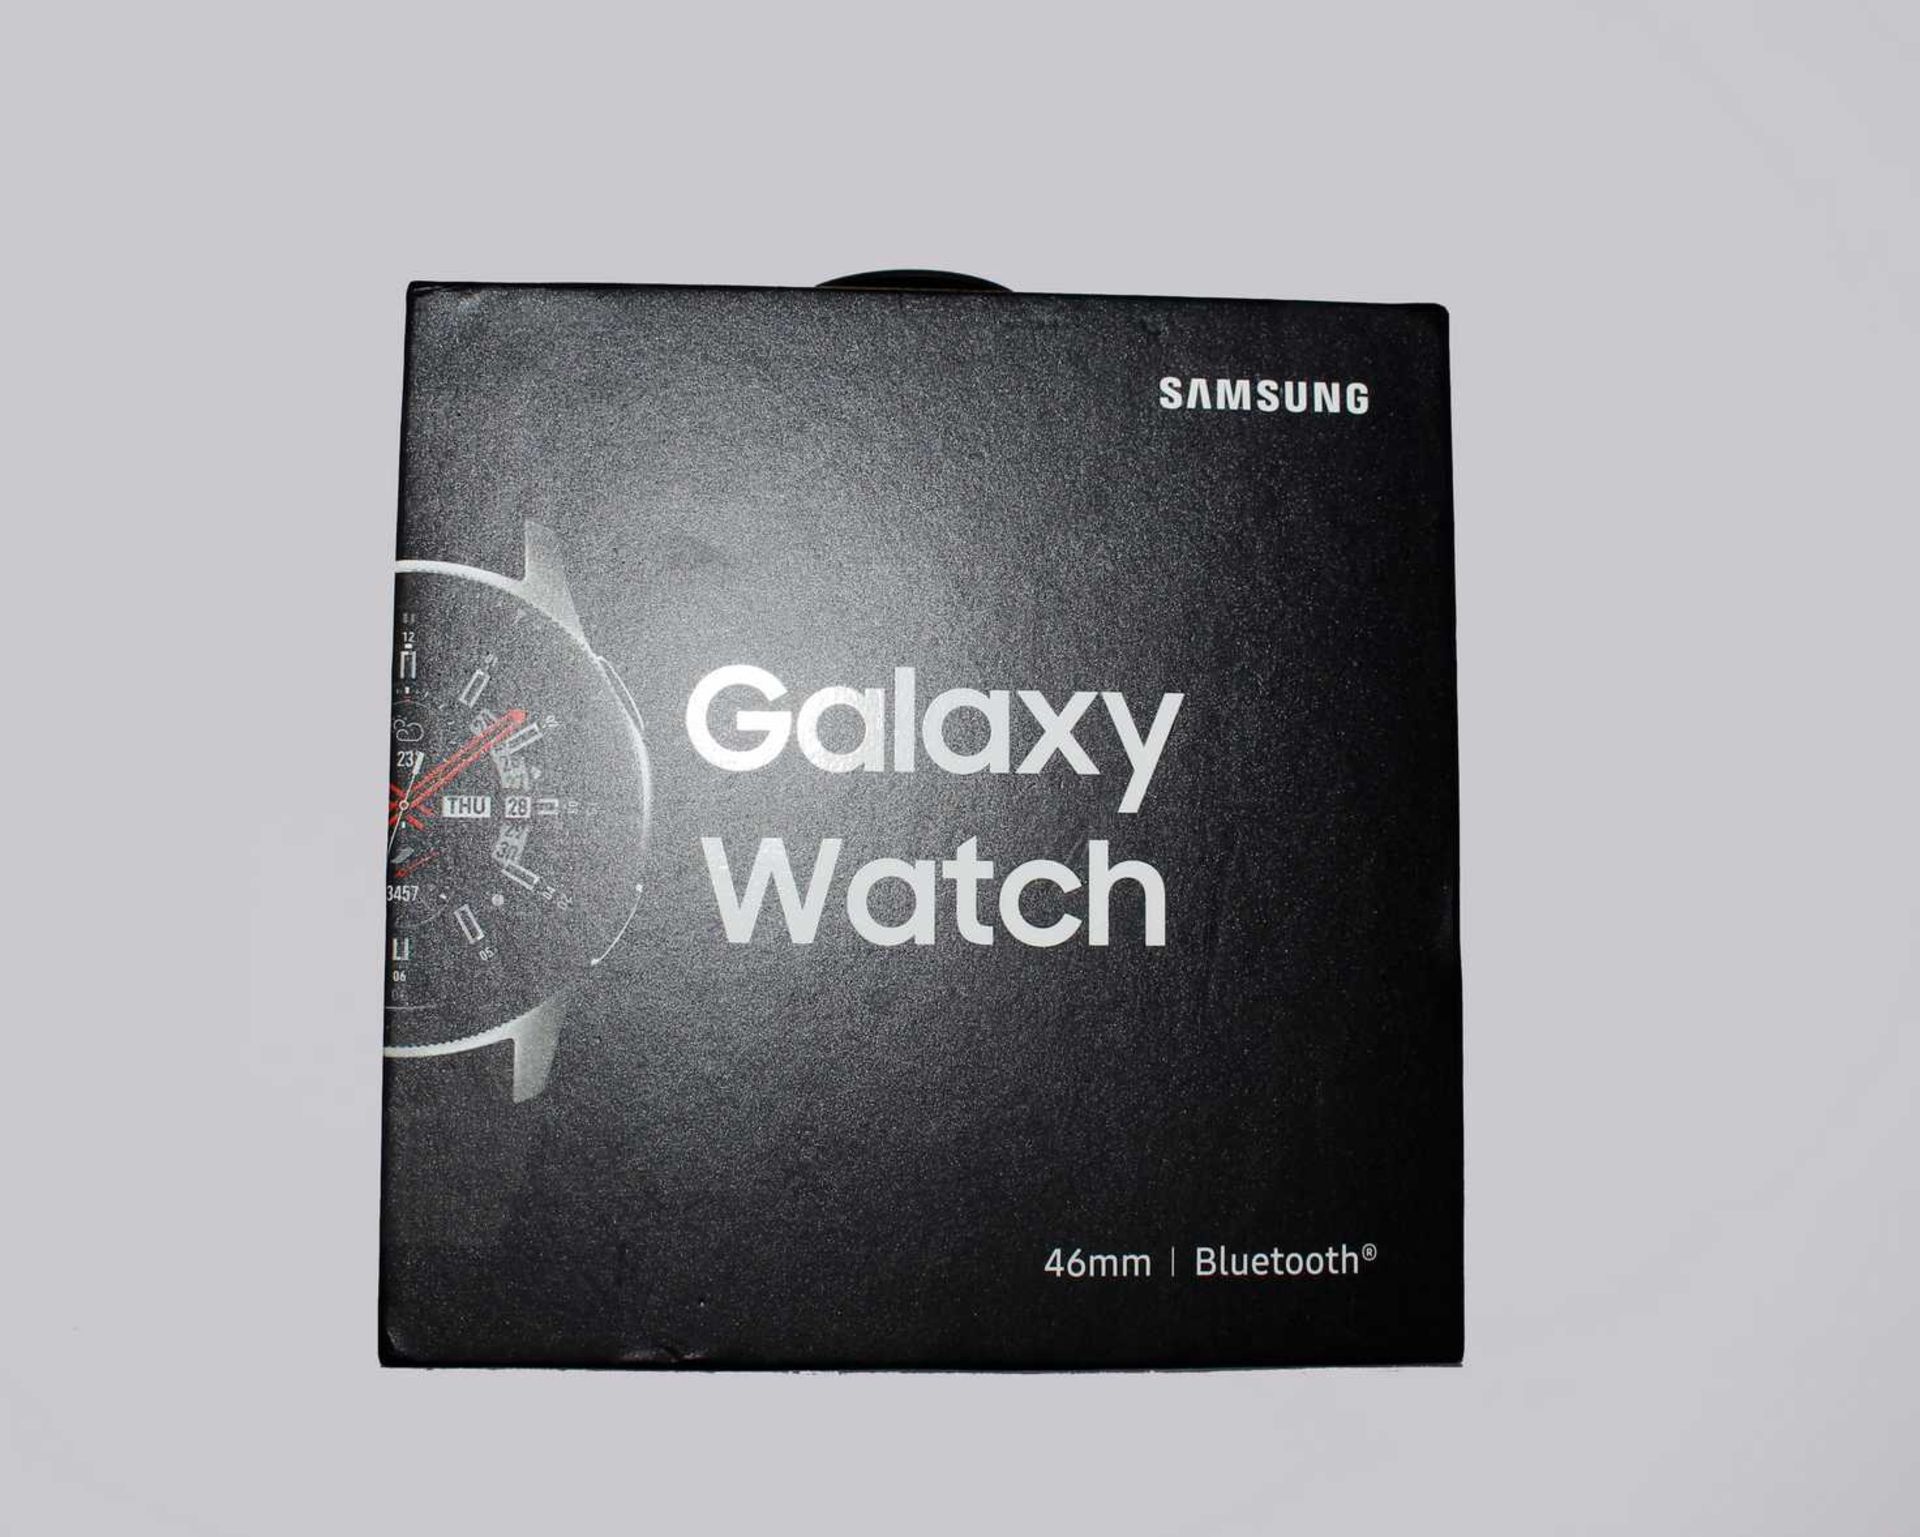 A pre-owned Samsung Galaxy Watch Bluetooth 46mm SM-R800 in Silver/Black (Box opened).